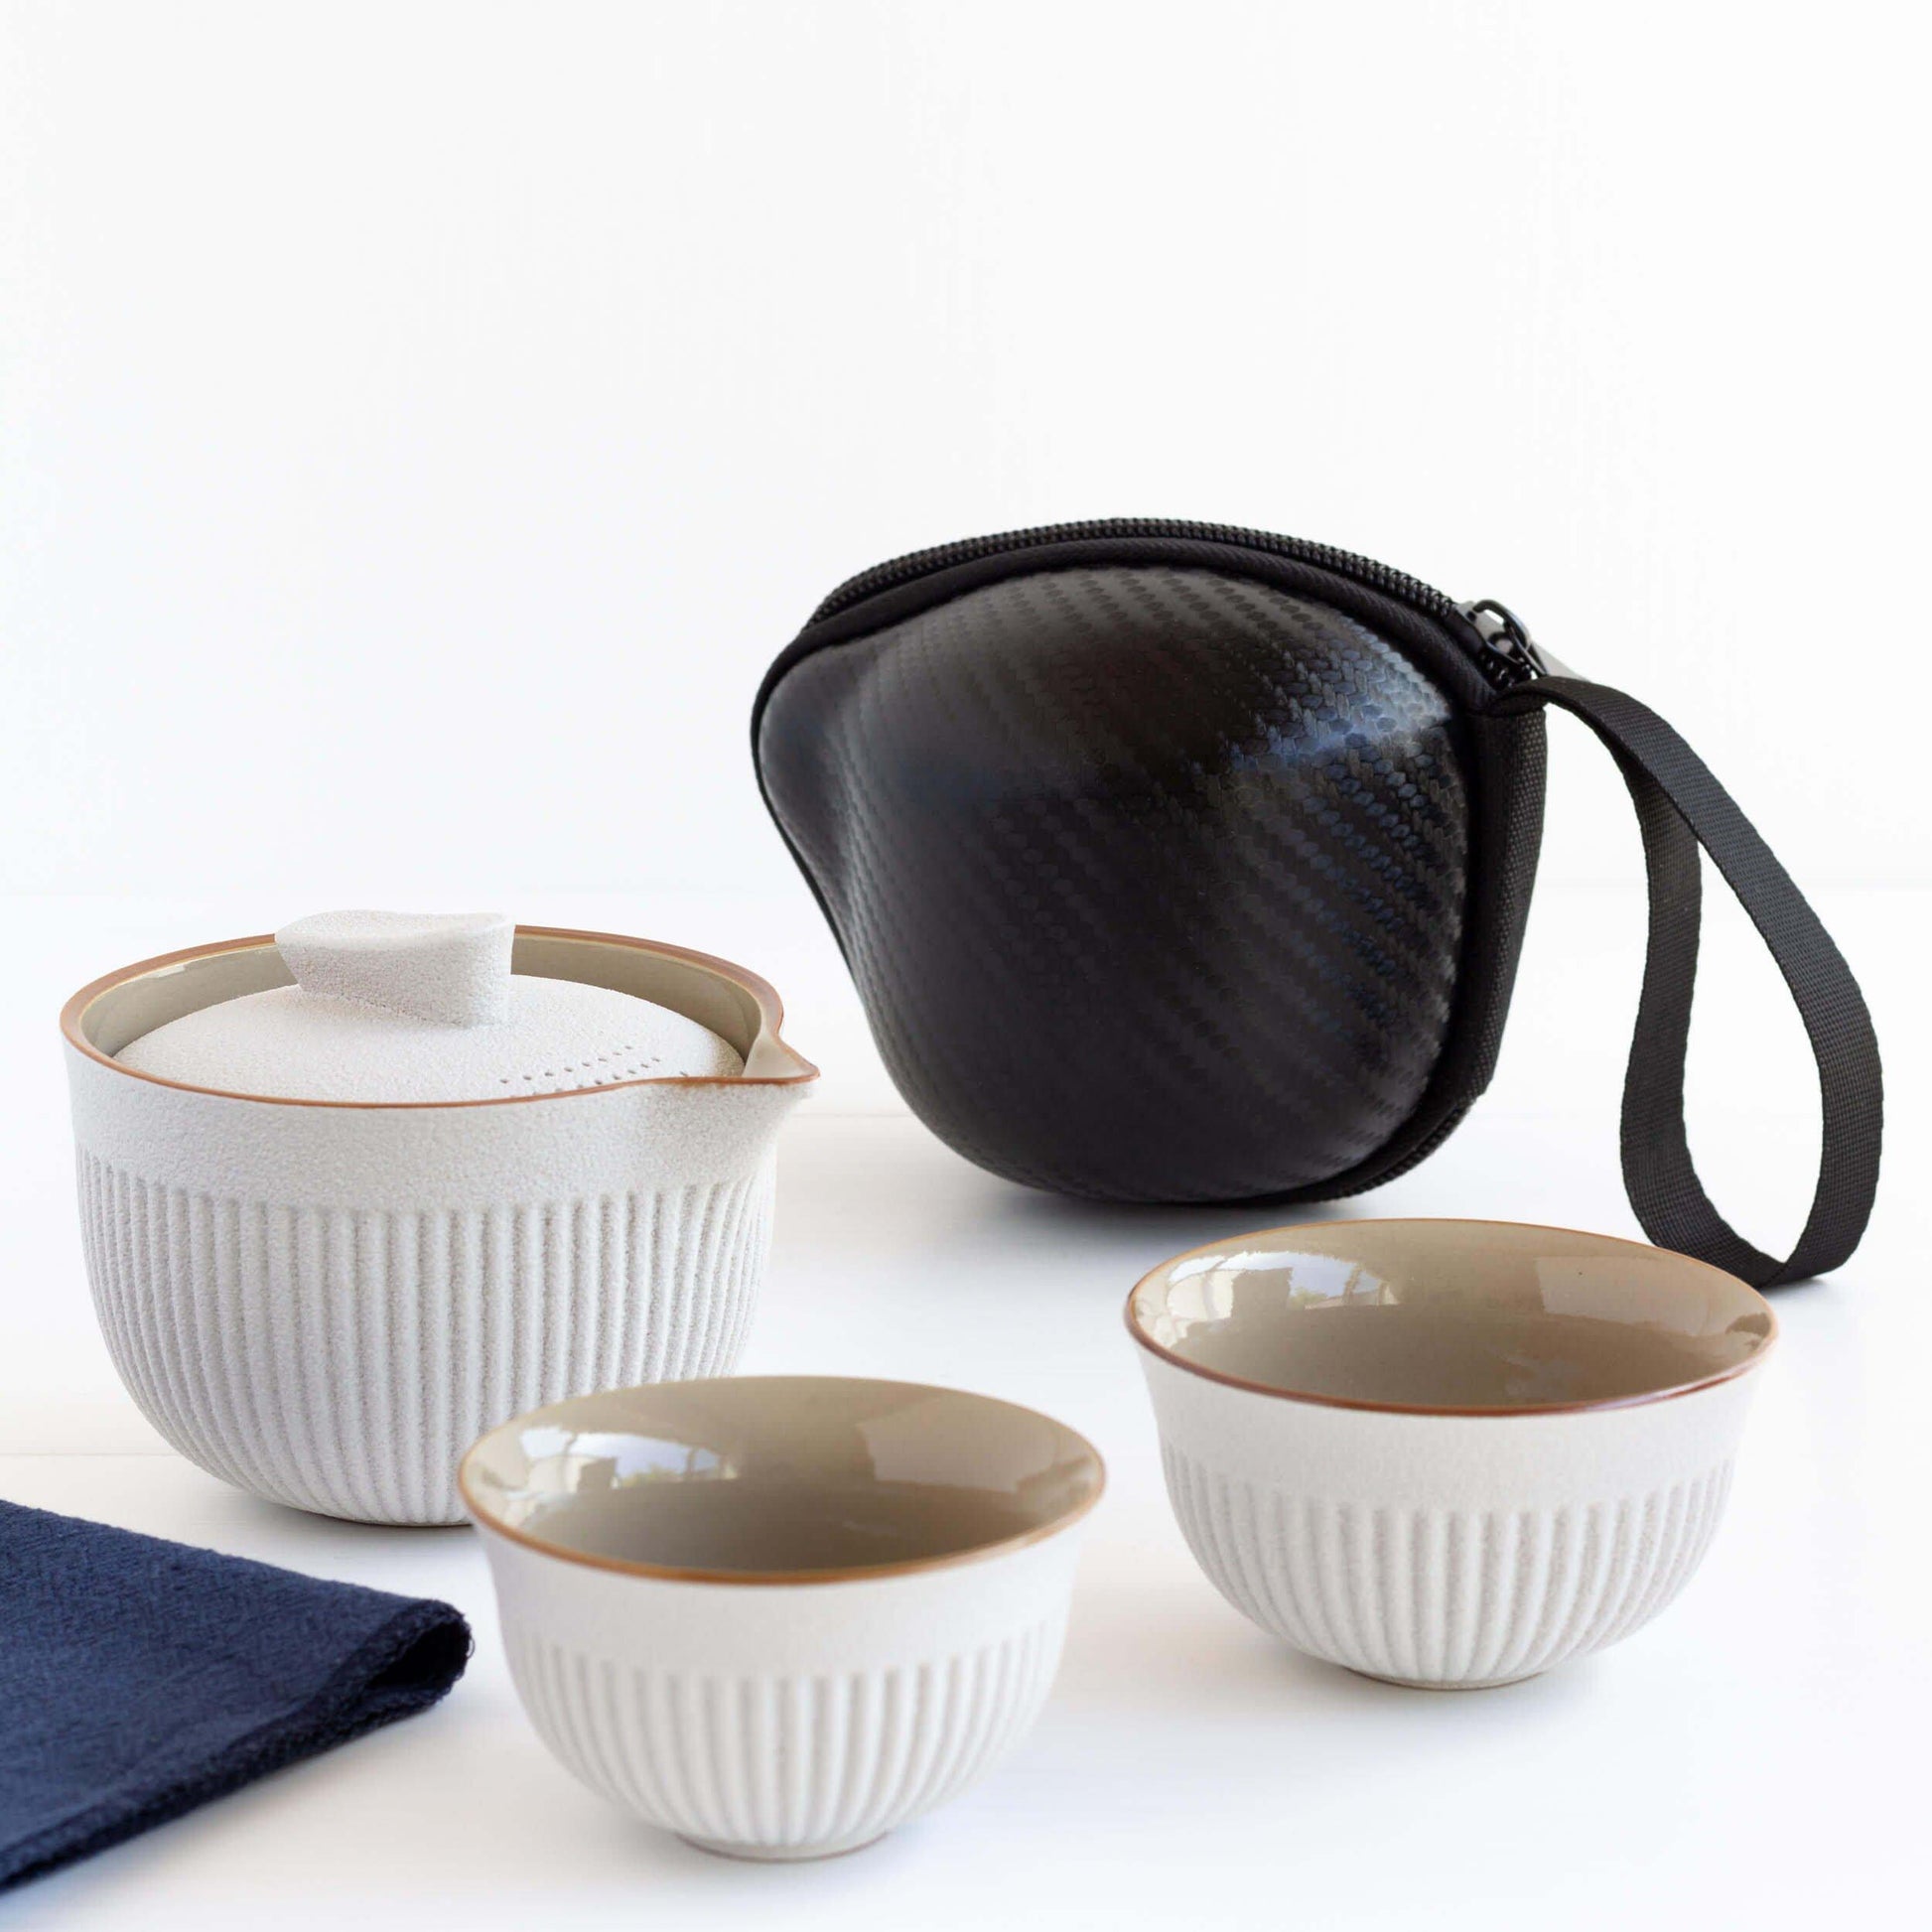 Ceramic And Glass Practical Travel Tea Set Case With 3 Cups